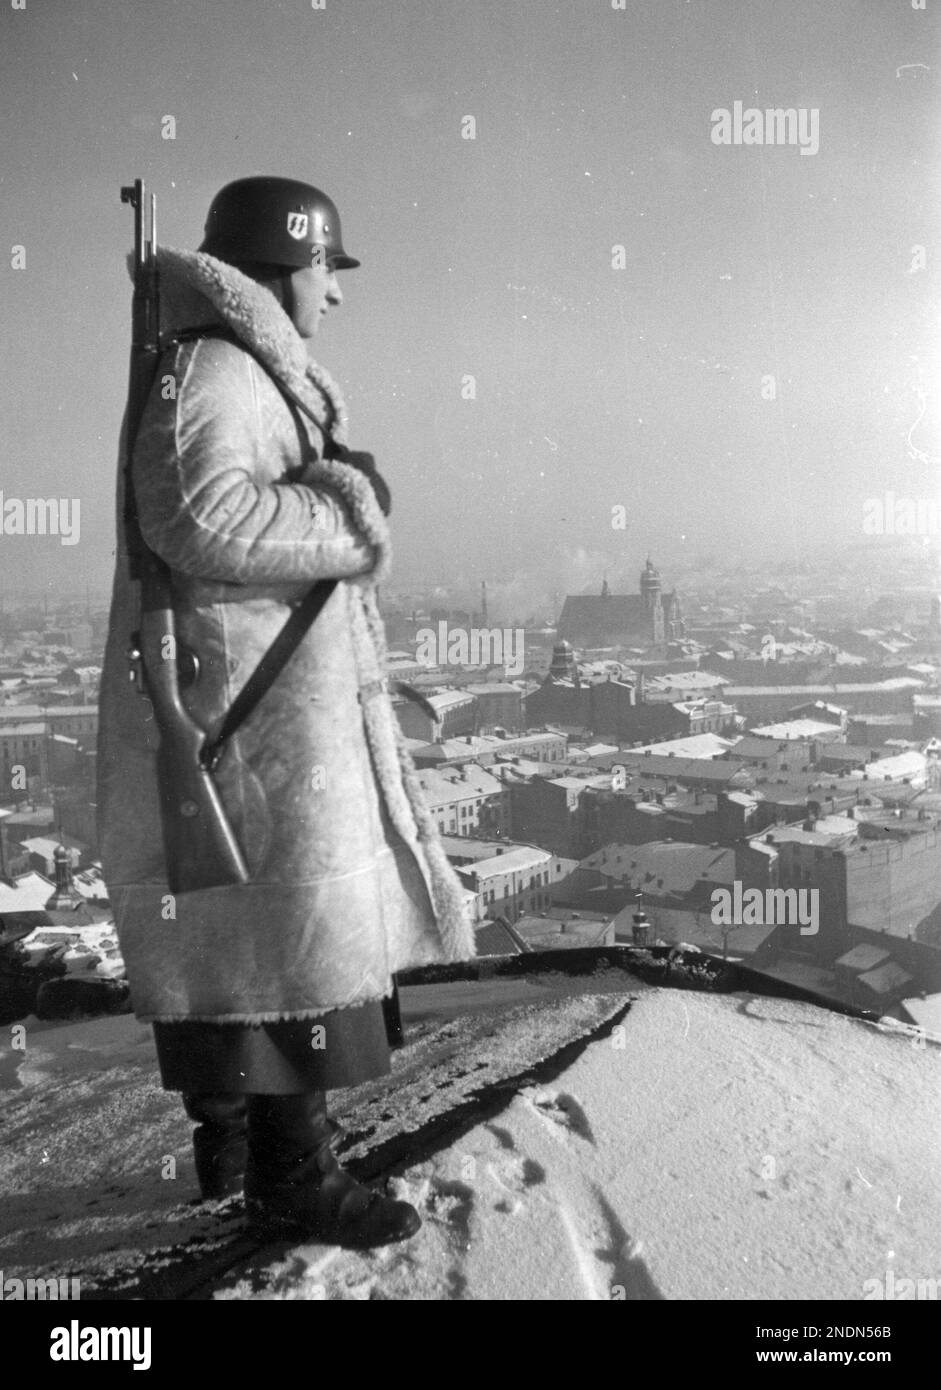 A soldier from the 10th SS Totenkopf regiment (wearing a sheepskin coat) on guard duty on the roof of the Royal Castle in Krakow. SourceNac.gov.pl Stock Photo